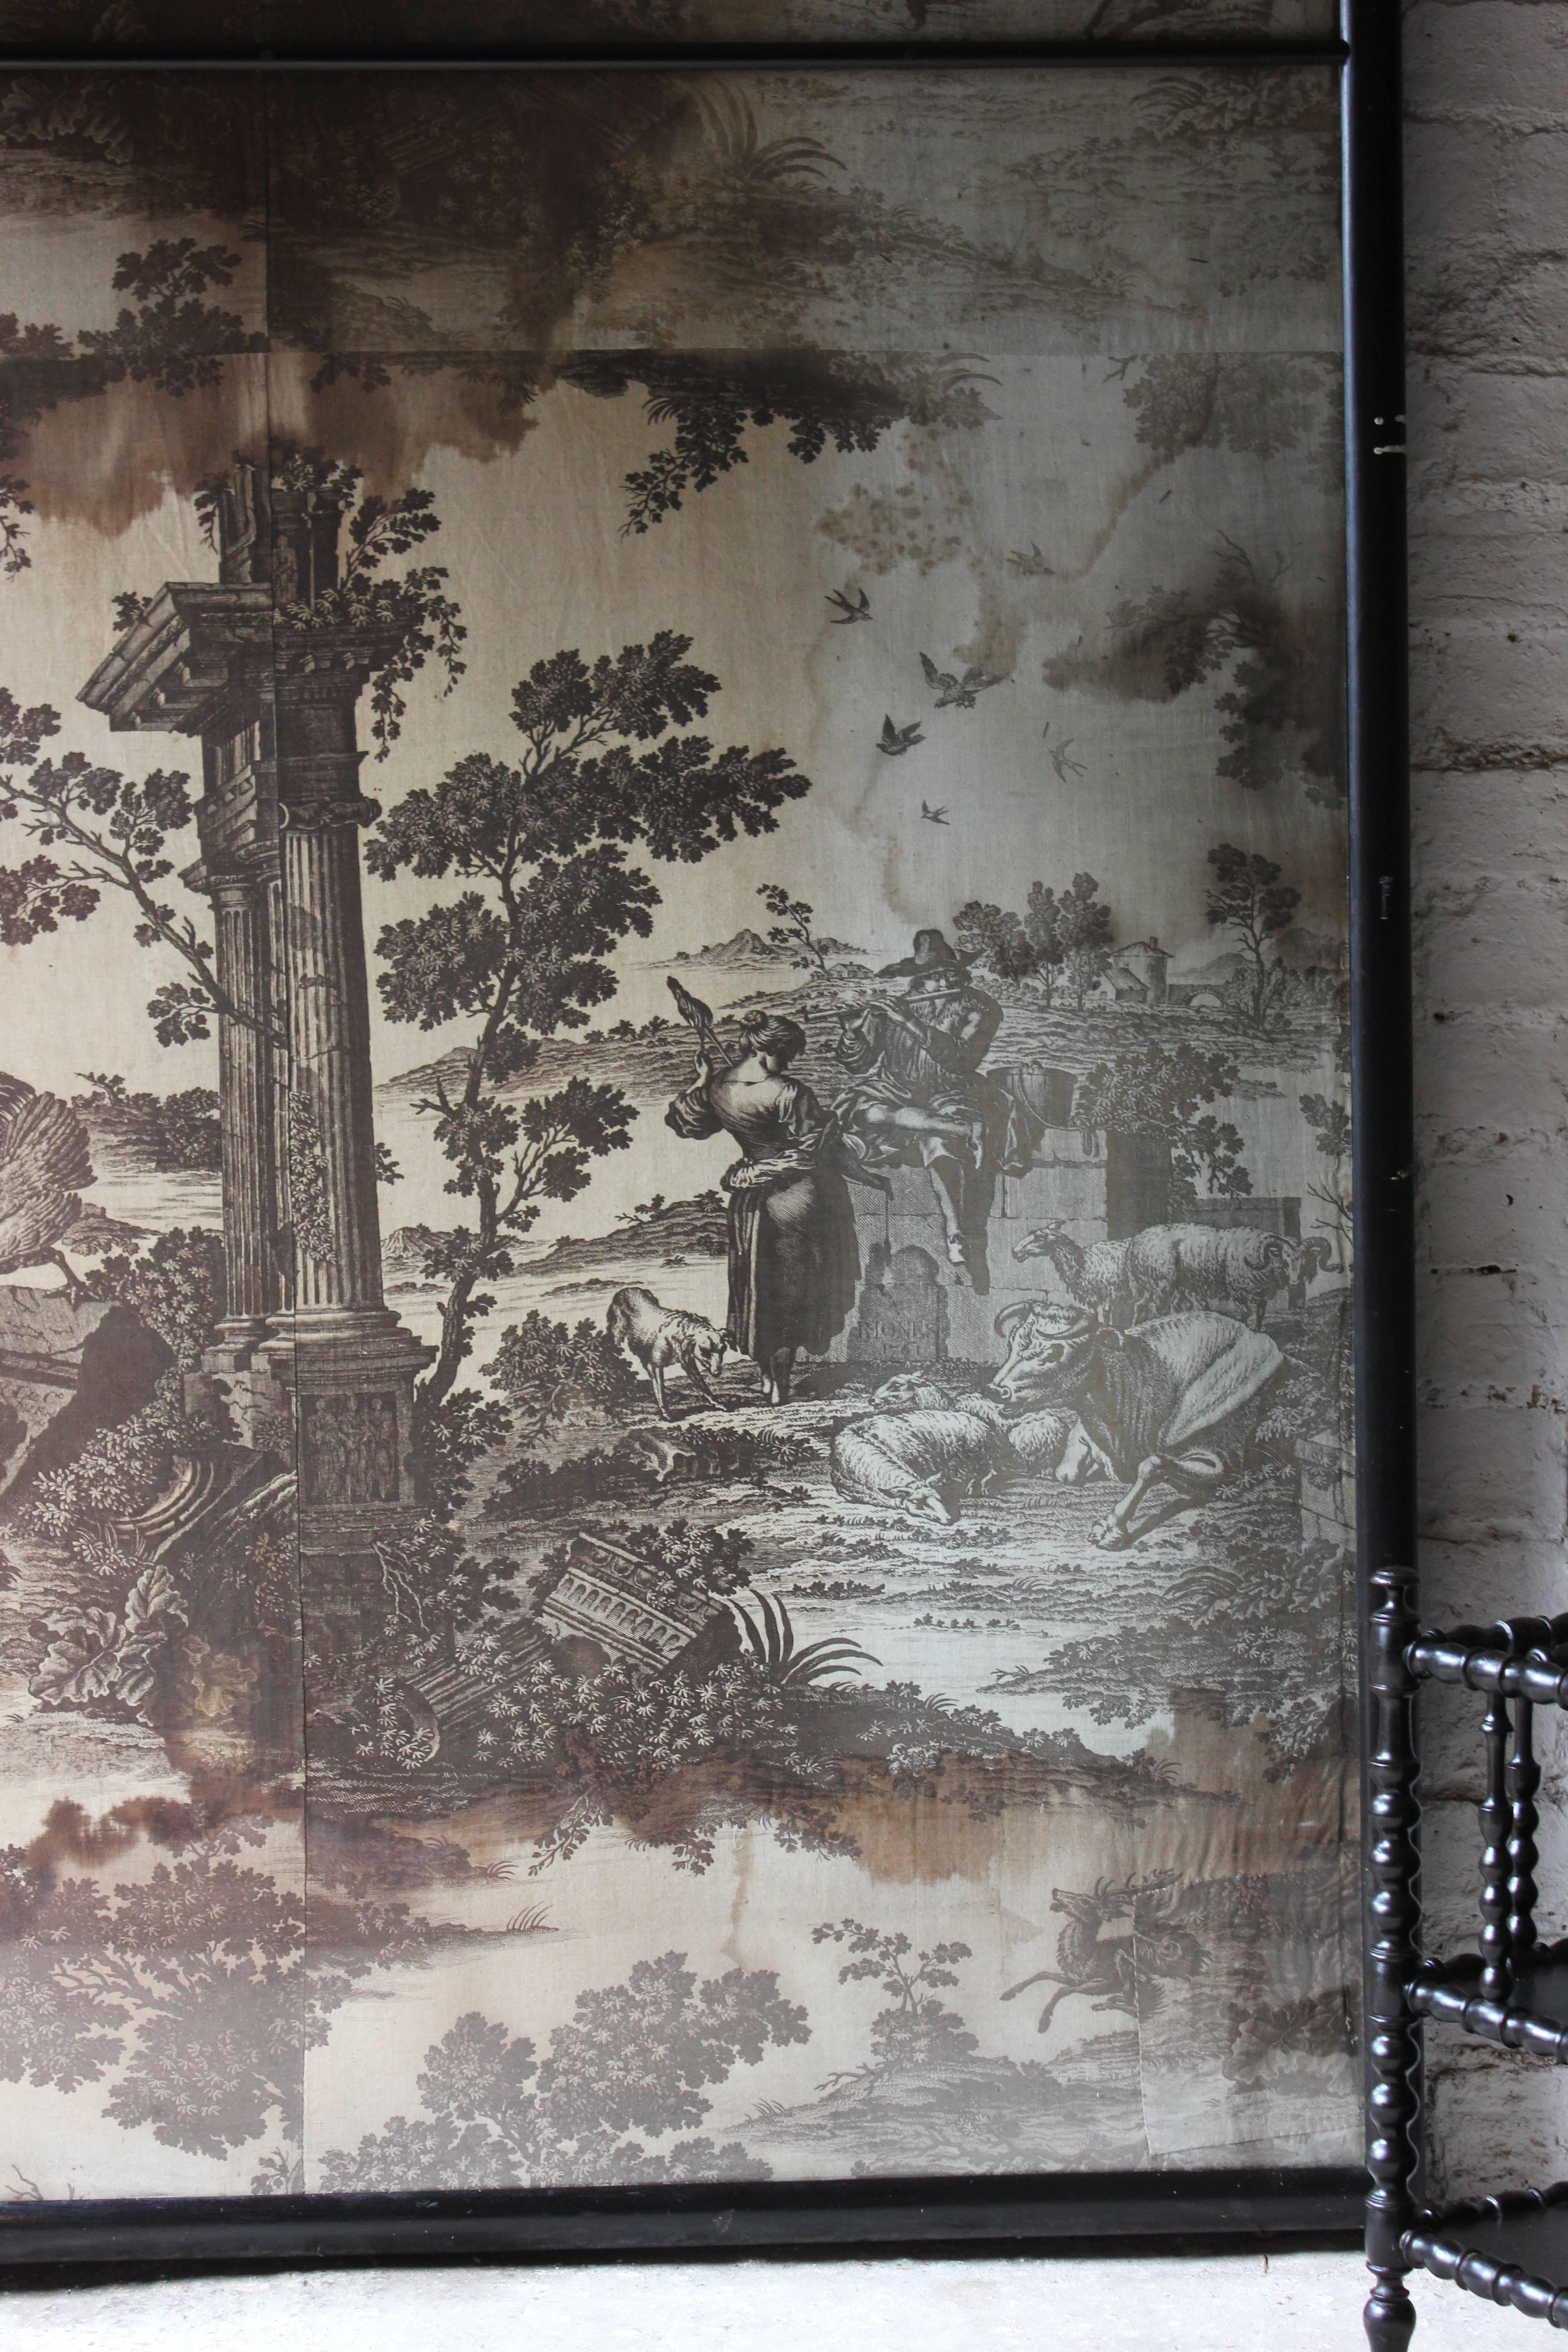 Ebonized Large Framed Mid-18thC Section of 'Toiles de Jouy' Wall Covering; 'The Old Ford'